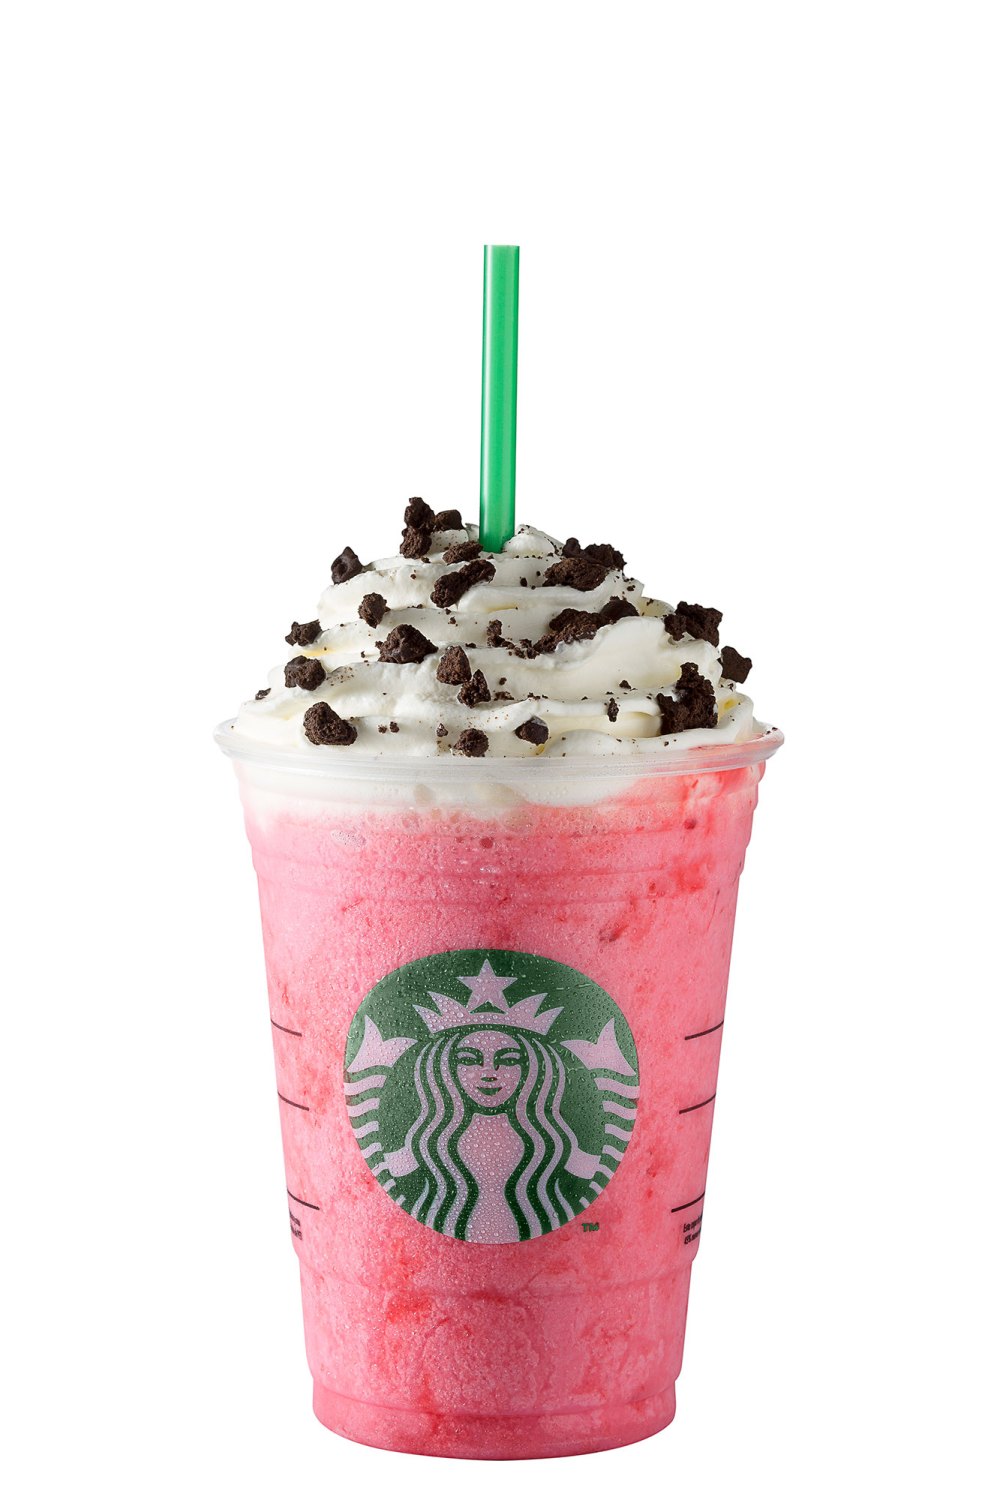 Starbucks Asia's New Mixed Berry Frappuccino Comes With Pomegranate Pearls and We Want It